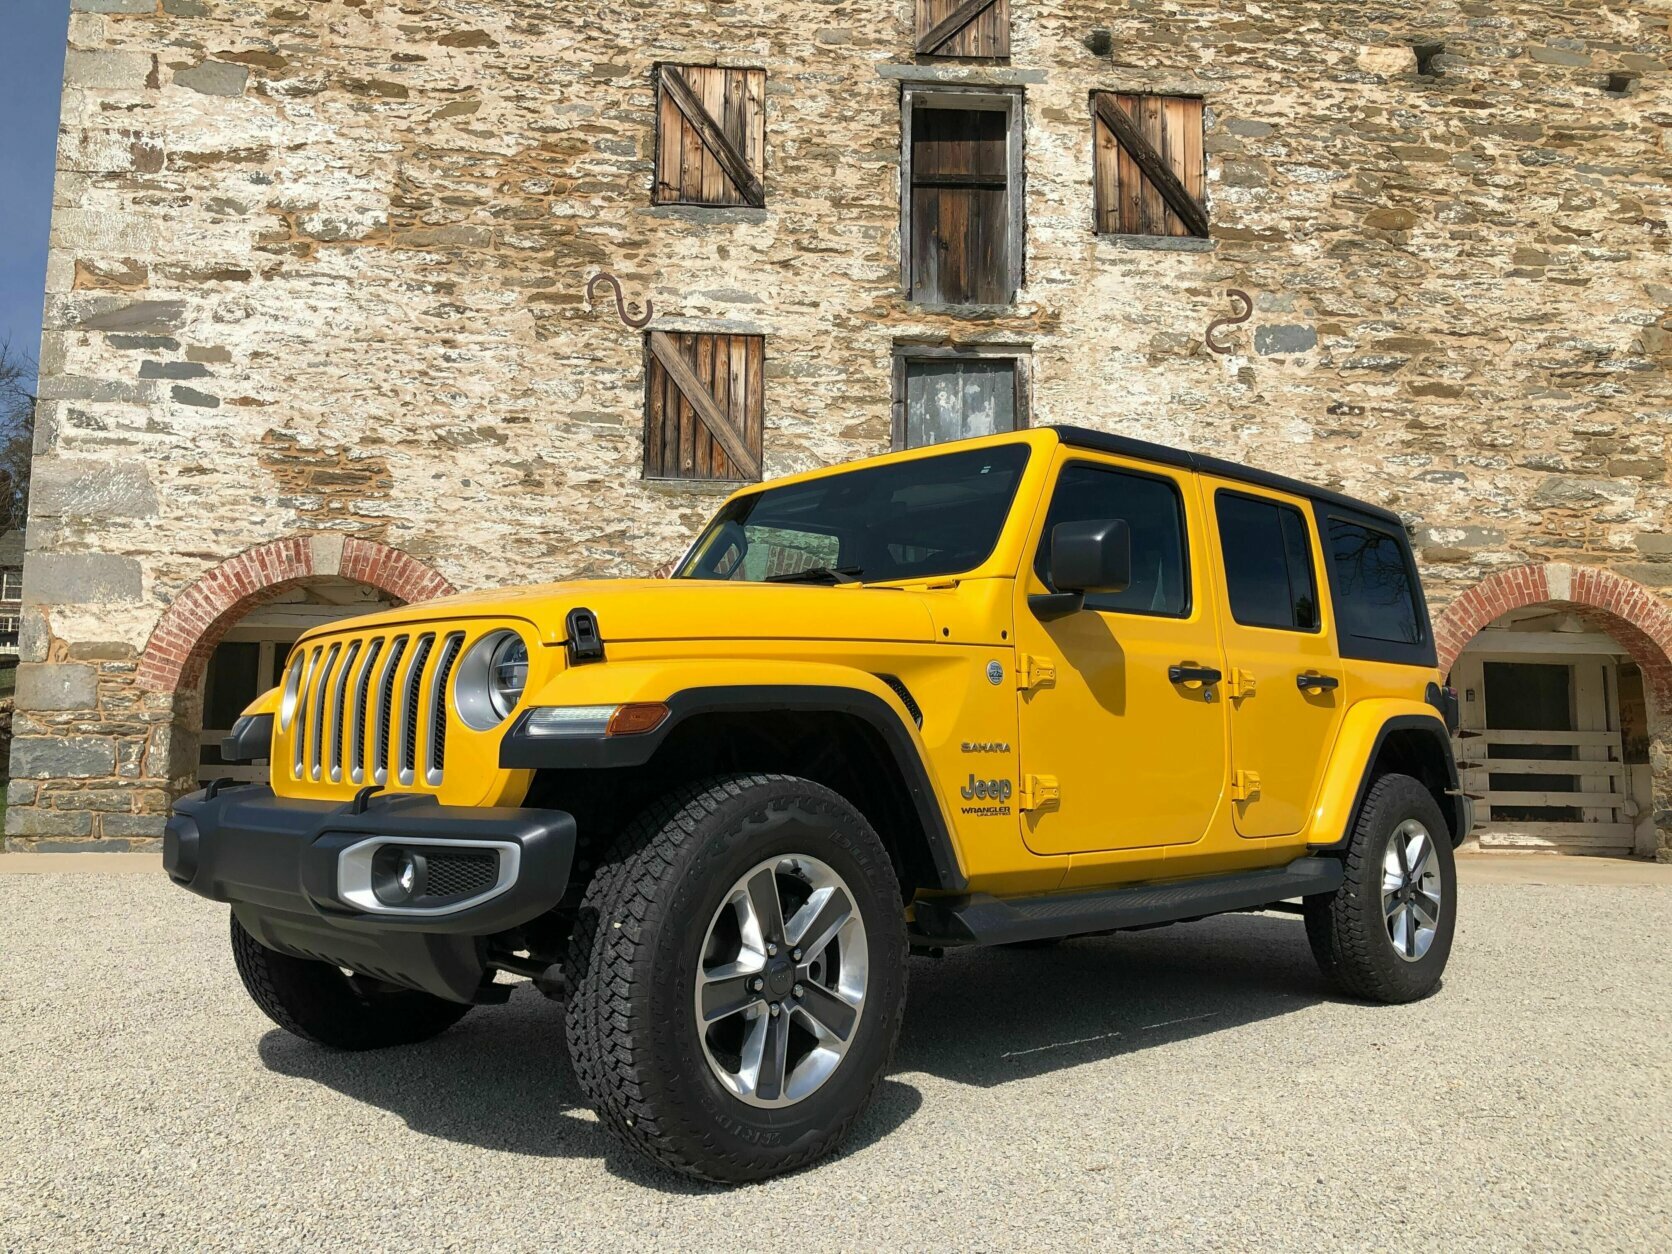 Exterior of the 2020 Jeep Wrangler Unlimited Sahara